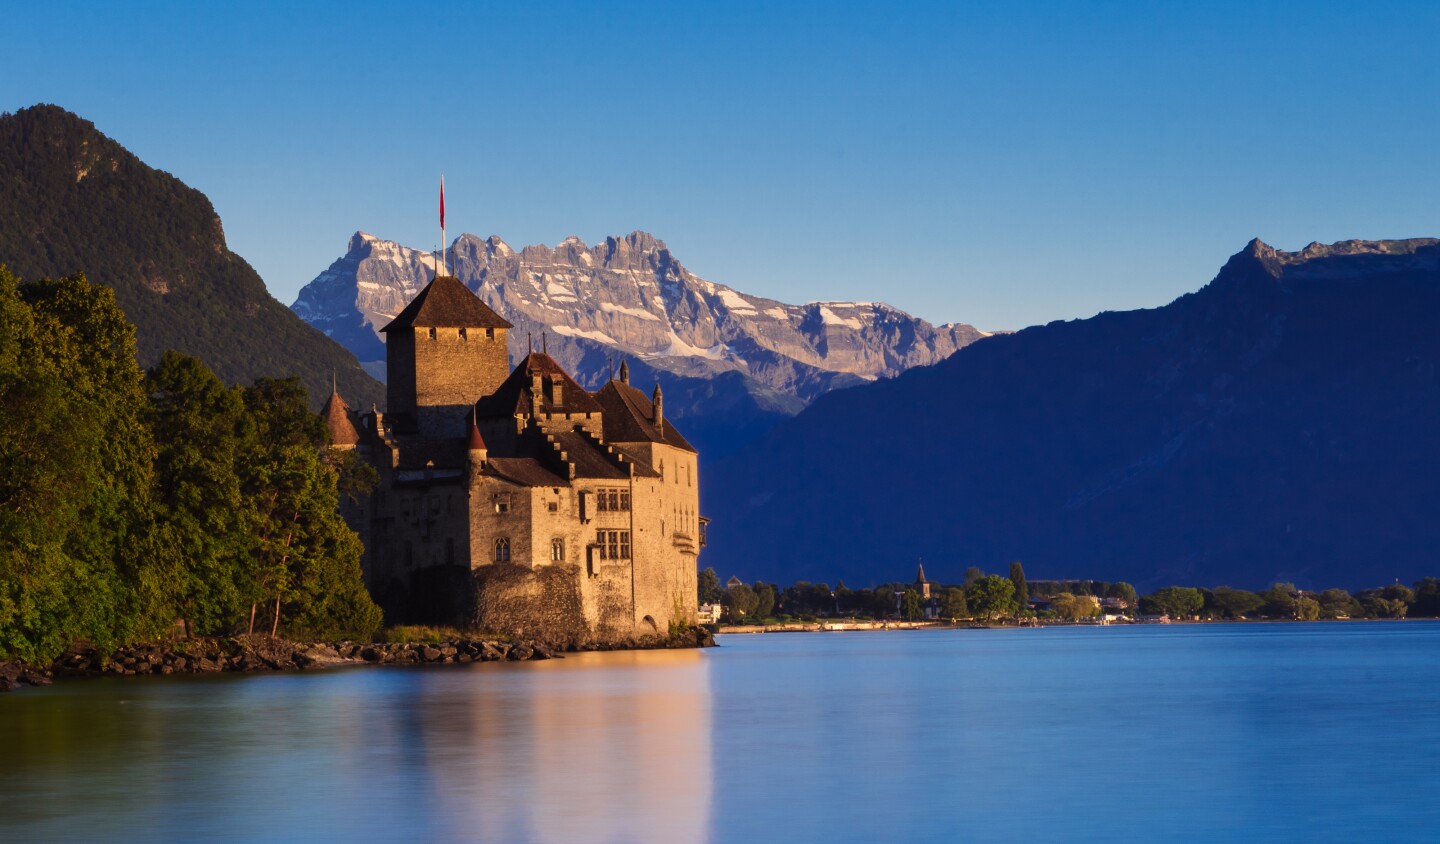 <h2>2. Château de Chillon</h2> <p><i>Veytaux, Switzerland</i></p> <p>Not simply the most popular castle in Switzerland, <a class="Link" href="https://www.chillon.ch/" rel="noopener">Château de Chillon</a> is also the most-visited historic building in the country. Part of that appeal is its location: on an island in Lake Geneva, which acts as a natural moat. Like many castles, additions and occupation continued after the Middle Ages, but the castle got its start in the mid-13th century. Gothic vaults from that time are visible in the prison.</p> <p>And part of the appeal of this castle is its association with Lord Byron. A visit there in 1816 inspired him to write the epic poem “The Prisoner of Chillon.” It’s based on the story of Francois Bonivard, a political prisoner.</p> <h3>How to visit Château de Chillon</h3> <p>Public transport options to the Chillon include a 75-minute train ride from Geneva three times a day and a direct ferry from Lausanne in the morning that takes 90 minutes. By car, the castle is about 2.5 miles from Montreux, and it’s open year round, except for the last week of December. Among several options for guided tours, you can finish with a glass of Clos de Chillon wine.</p>